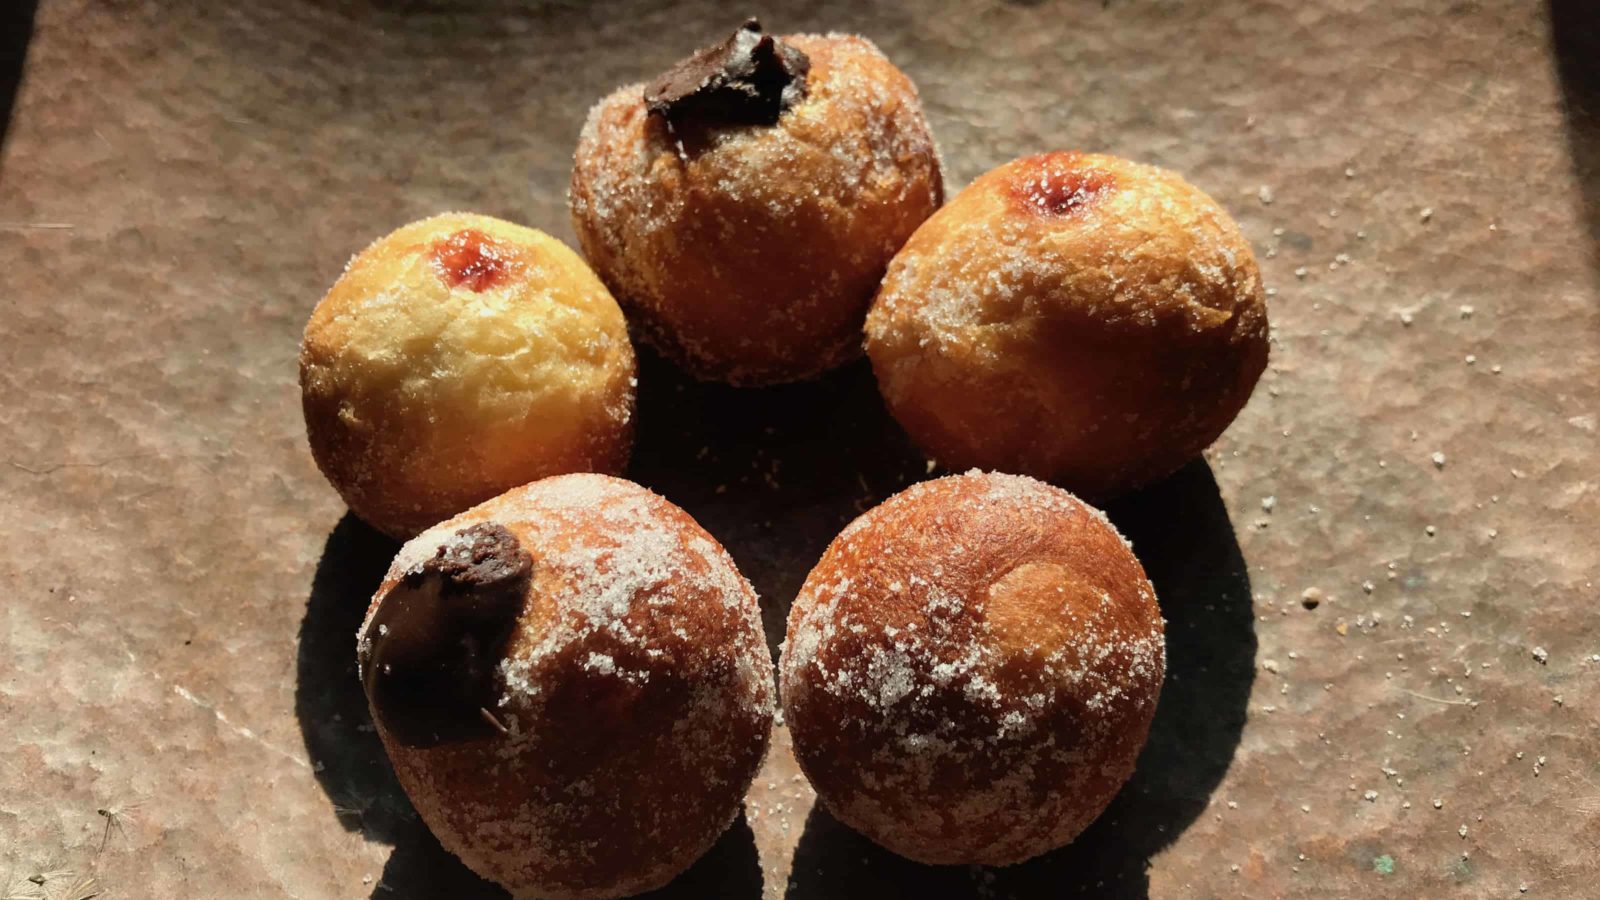 In a pandemic spring and summer, A-Ok Barbecue responded with their own homemade doughnuts.